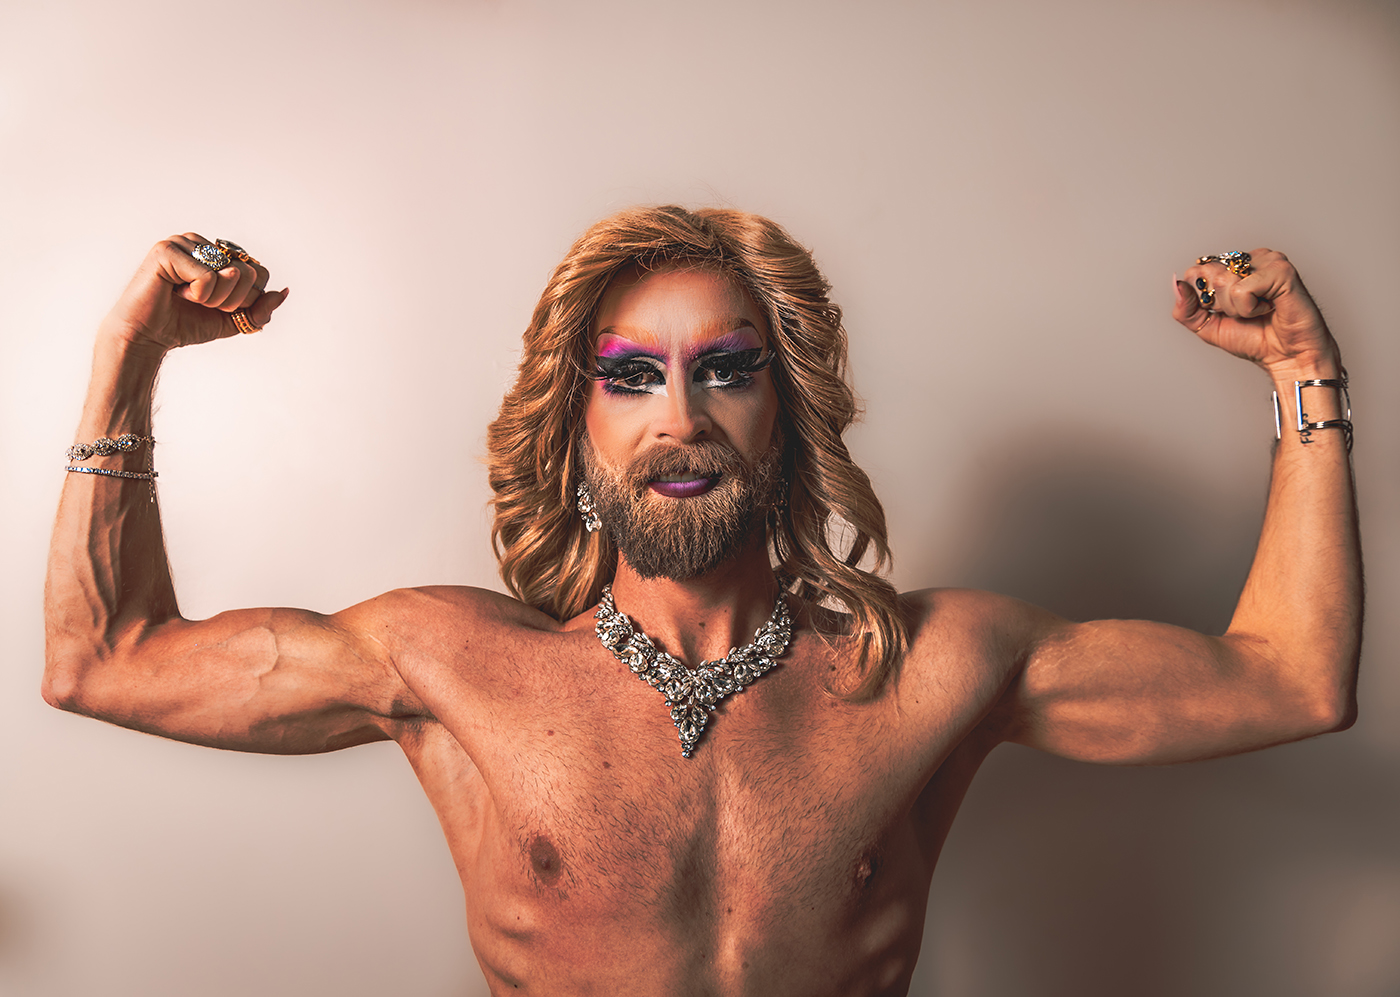 “[My beard] reminds me that I am a man. ... The drag world has made me embrace my femininity and ... [made me] proud of being called a woman. Interestingly enough, it has also caused me to embrace my masculinity," says Marrlo Suzzanne.